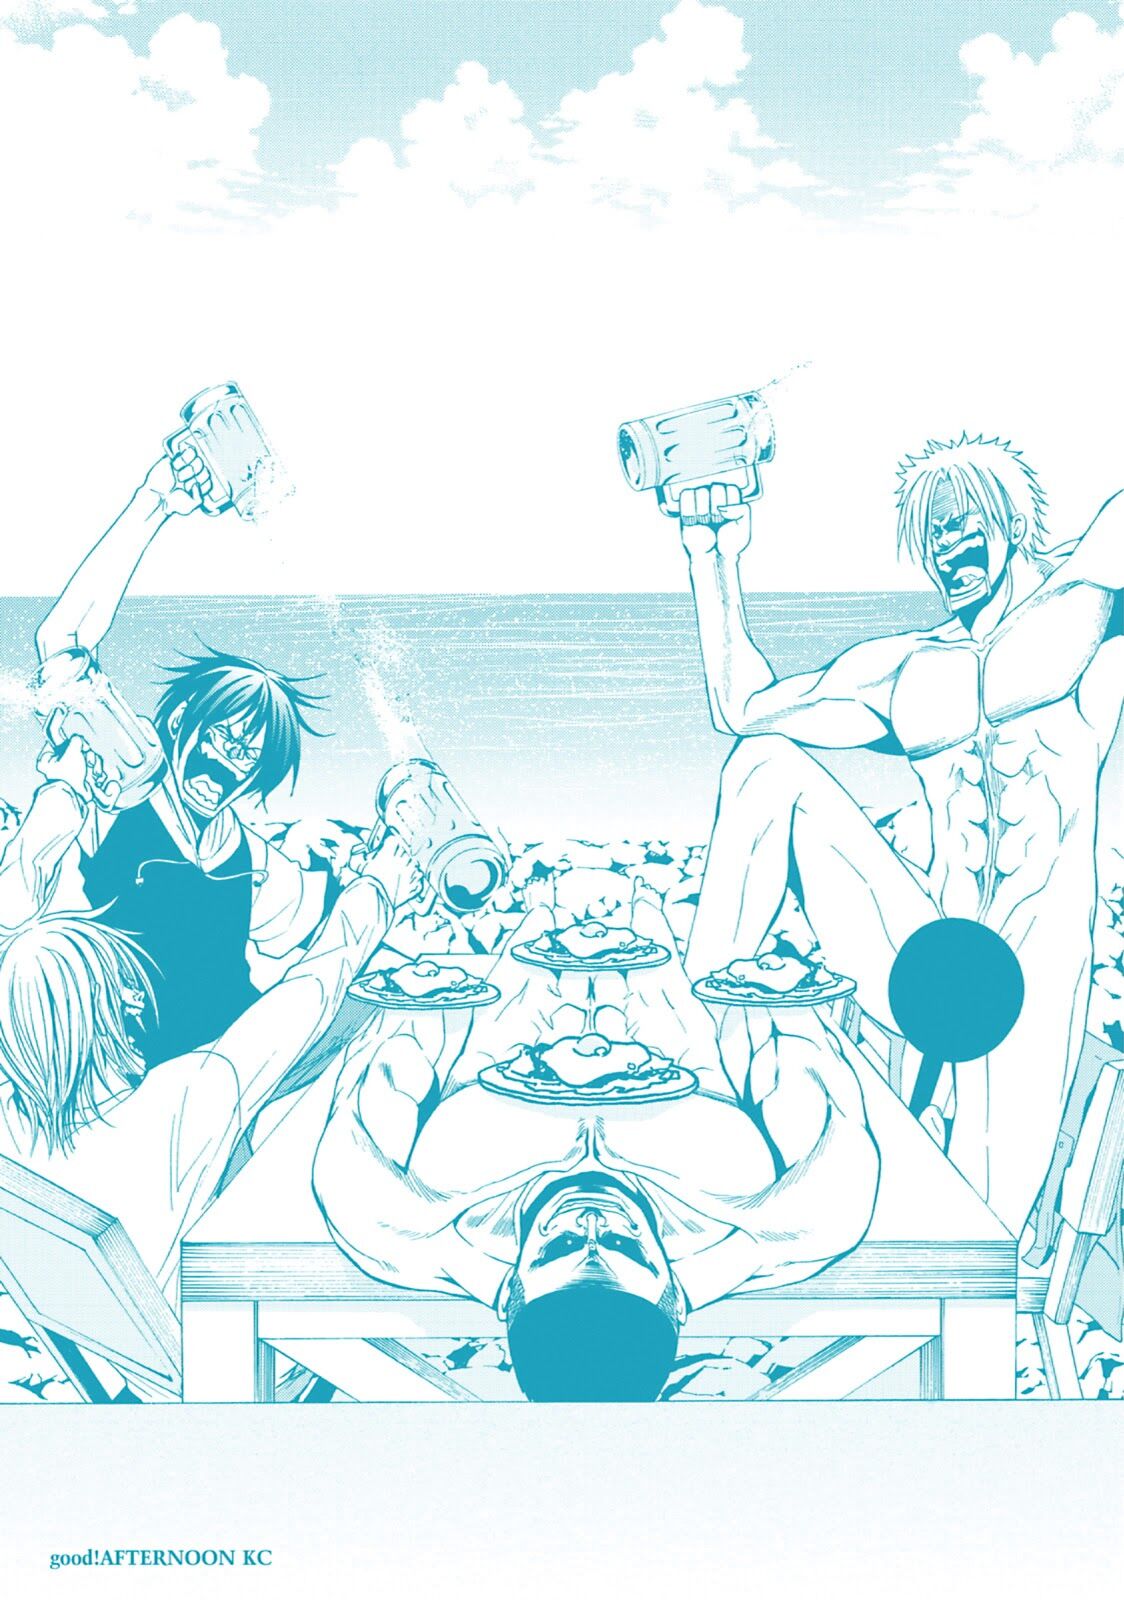 Grand Blue Chapter 08.5